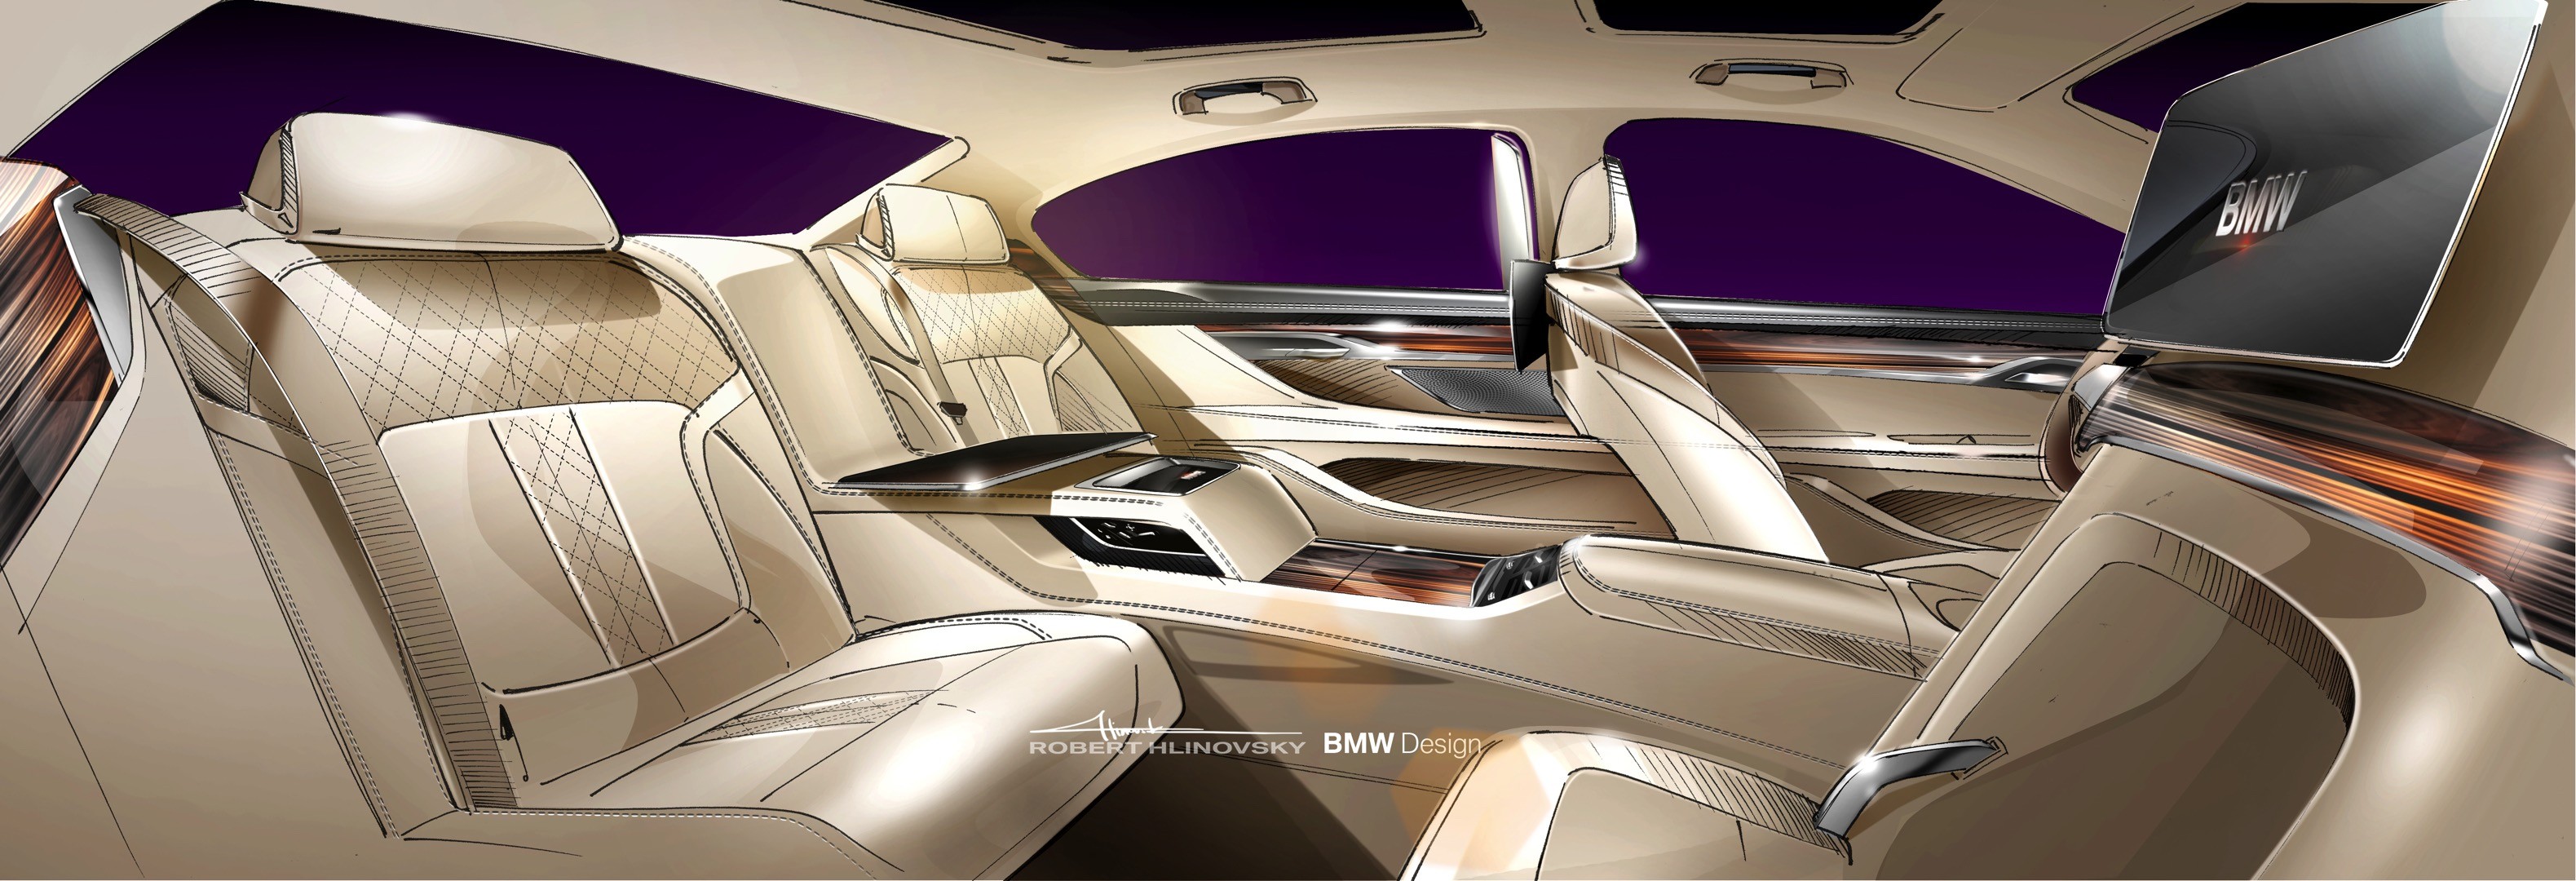 2016-bmw-7-series-finally-officially-unveiled-the-good-stuffs-inside-photo-gallery_82